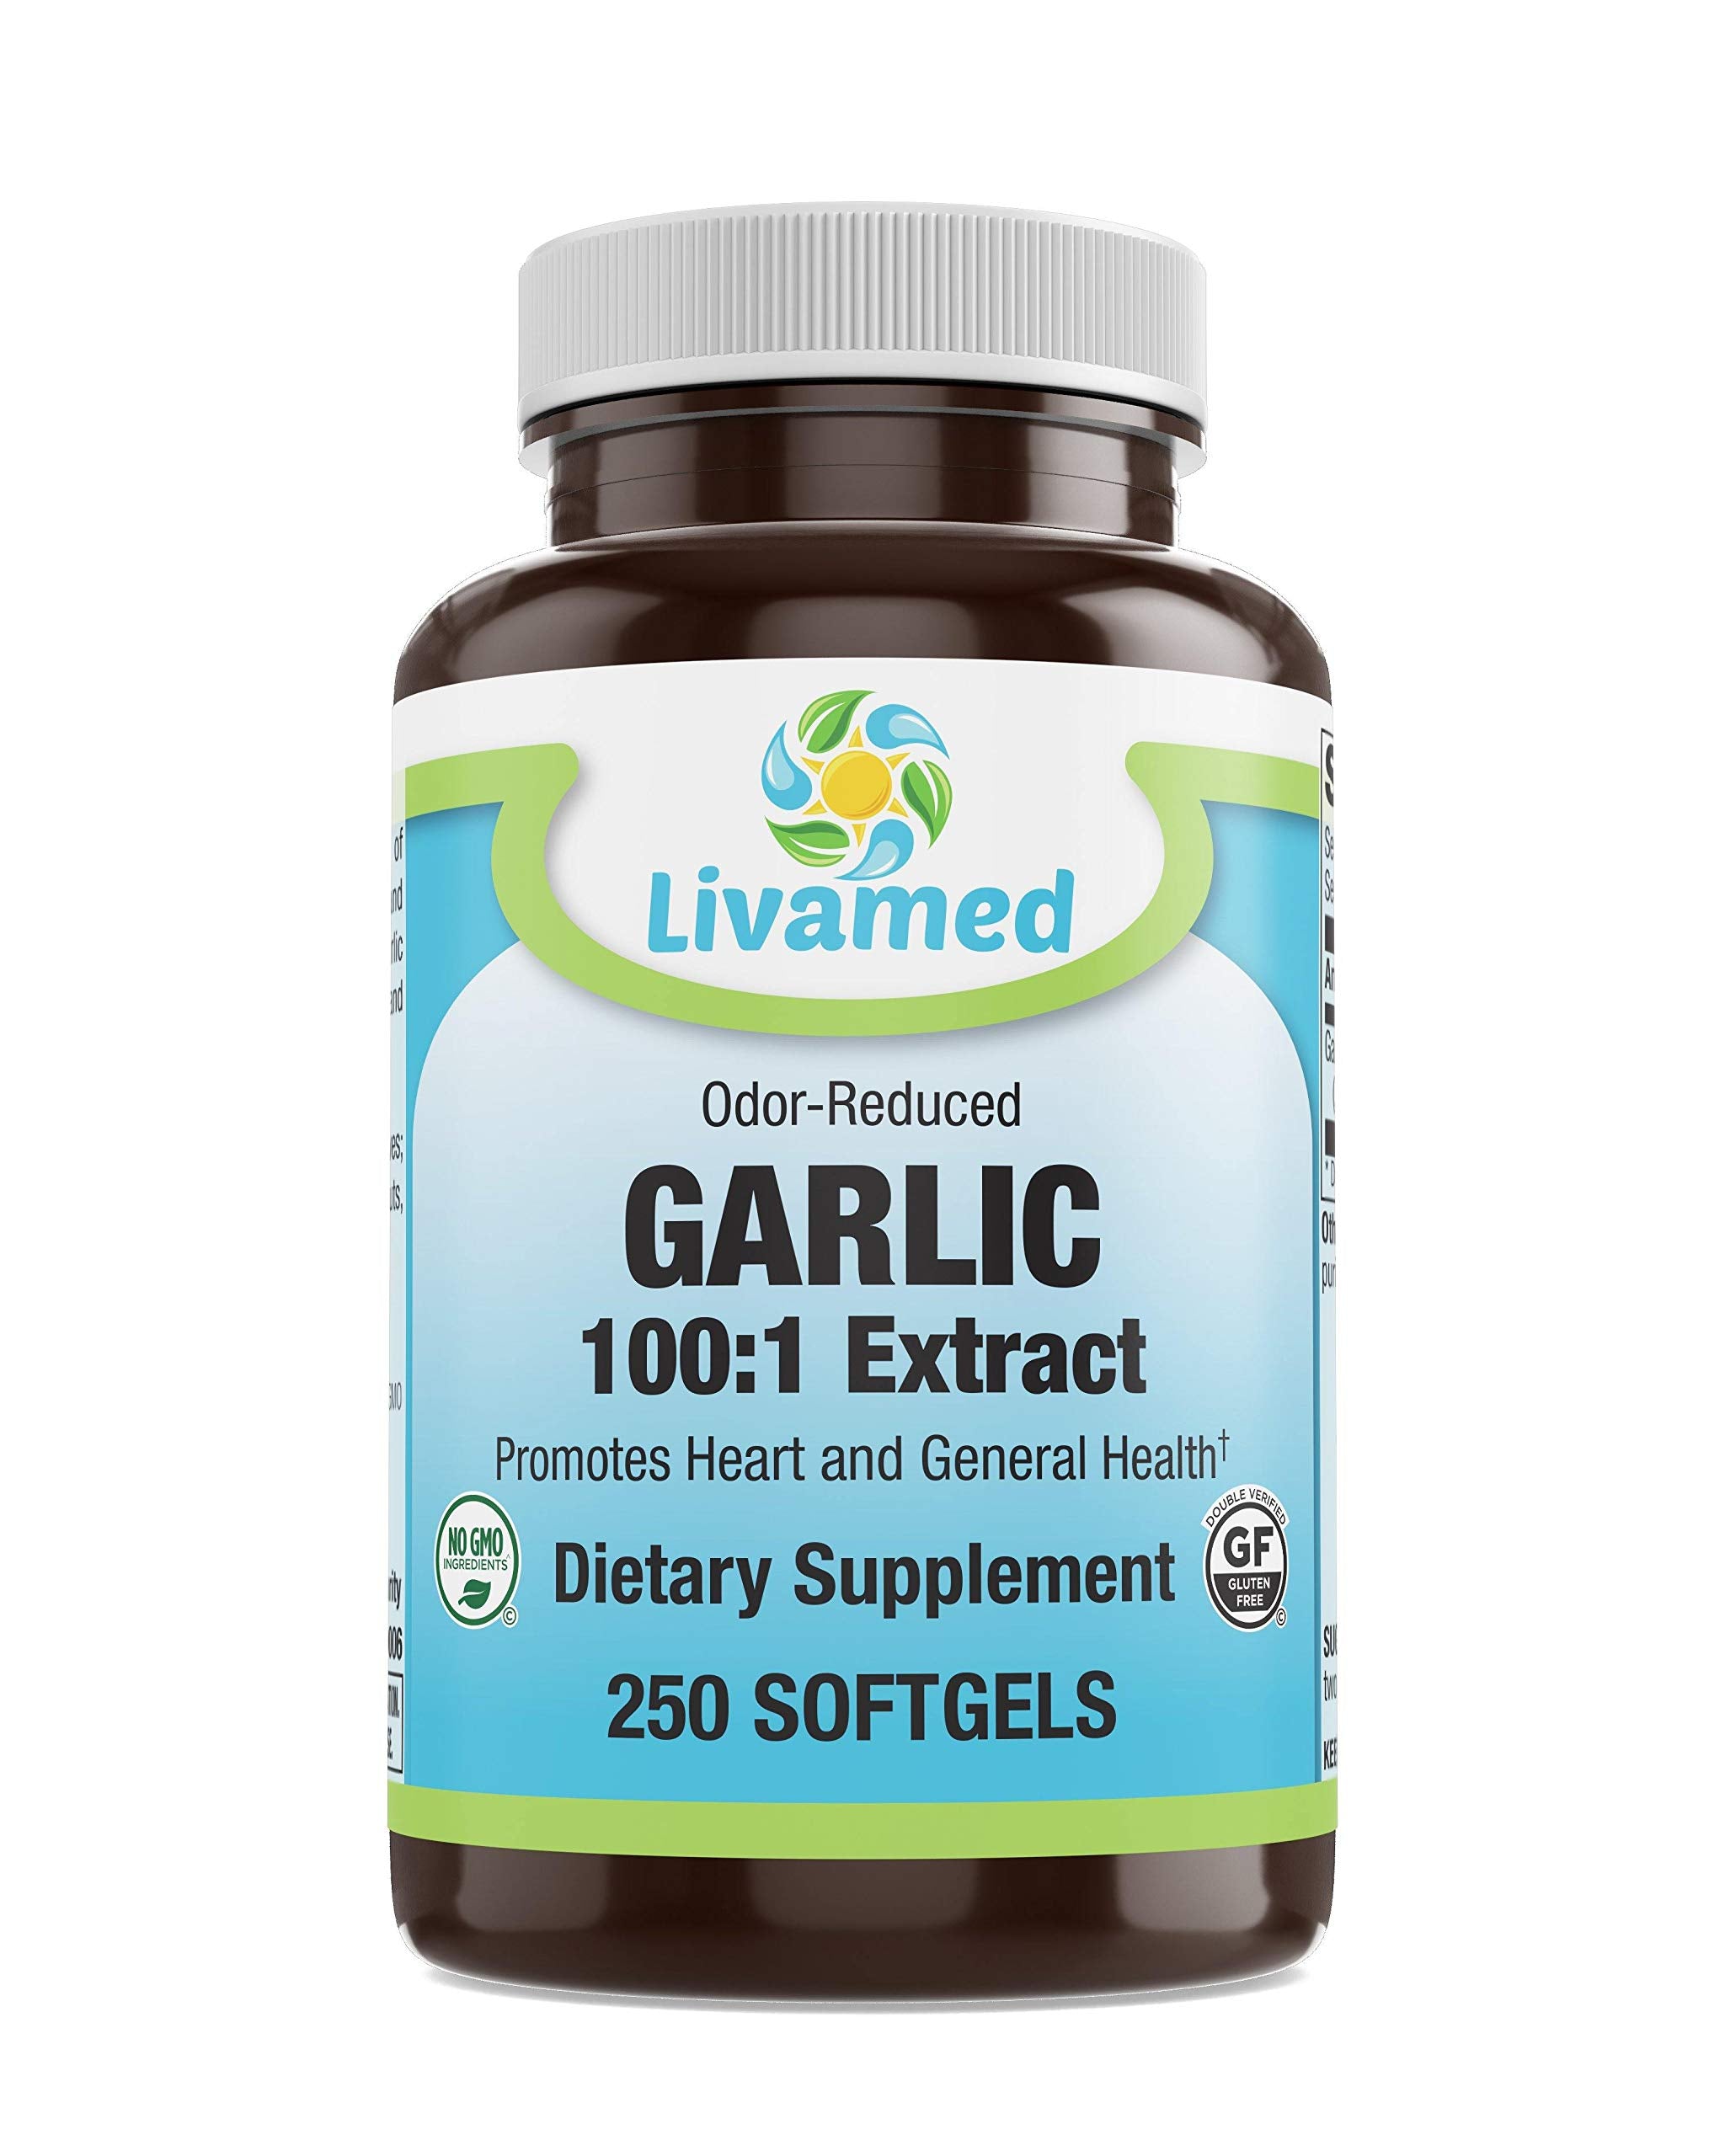 Livamed - Garlic 500 mg 100:1 Extract Odor-Reduced Softgels 250 Count